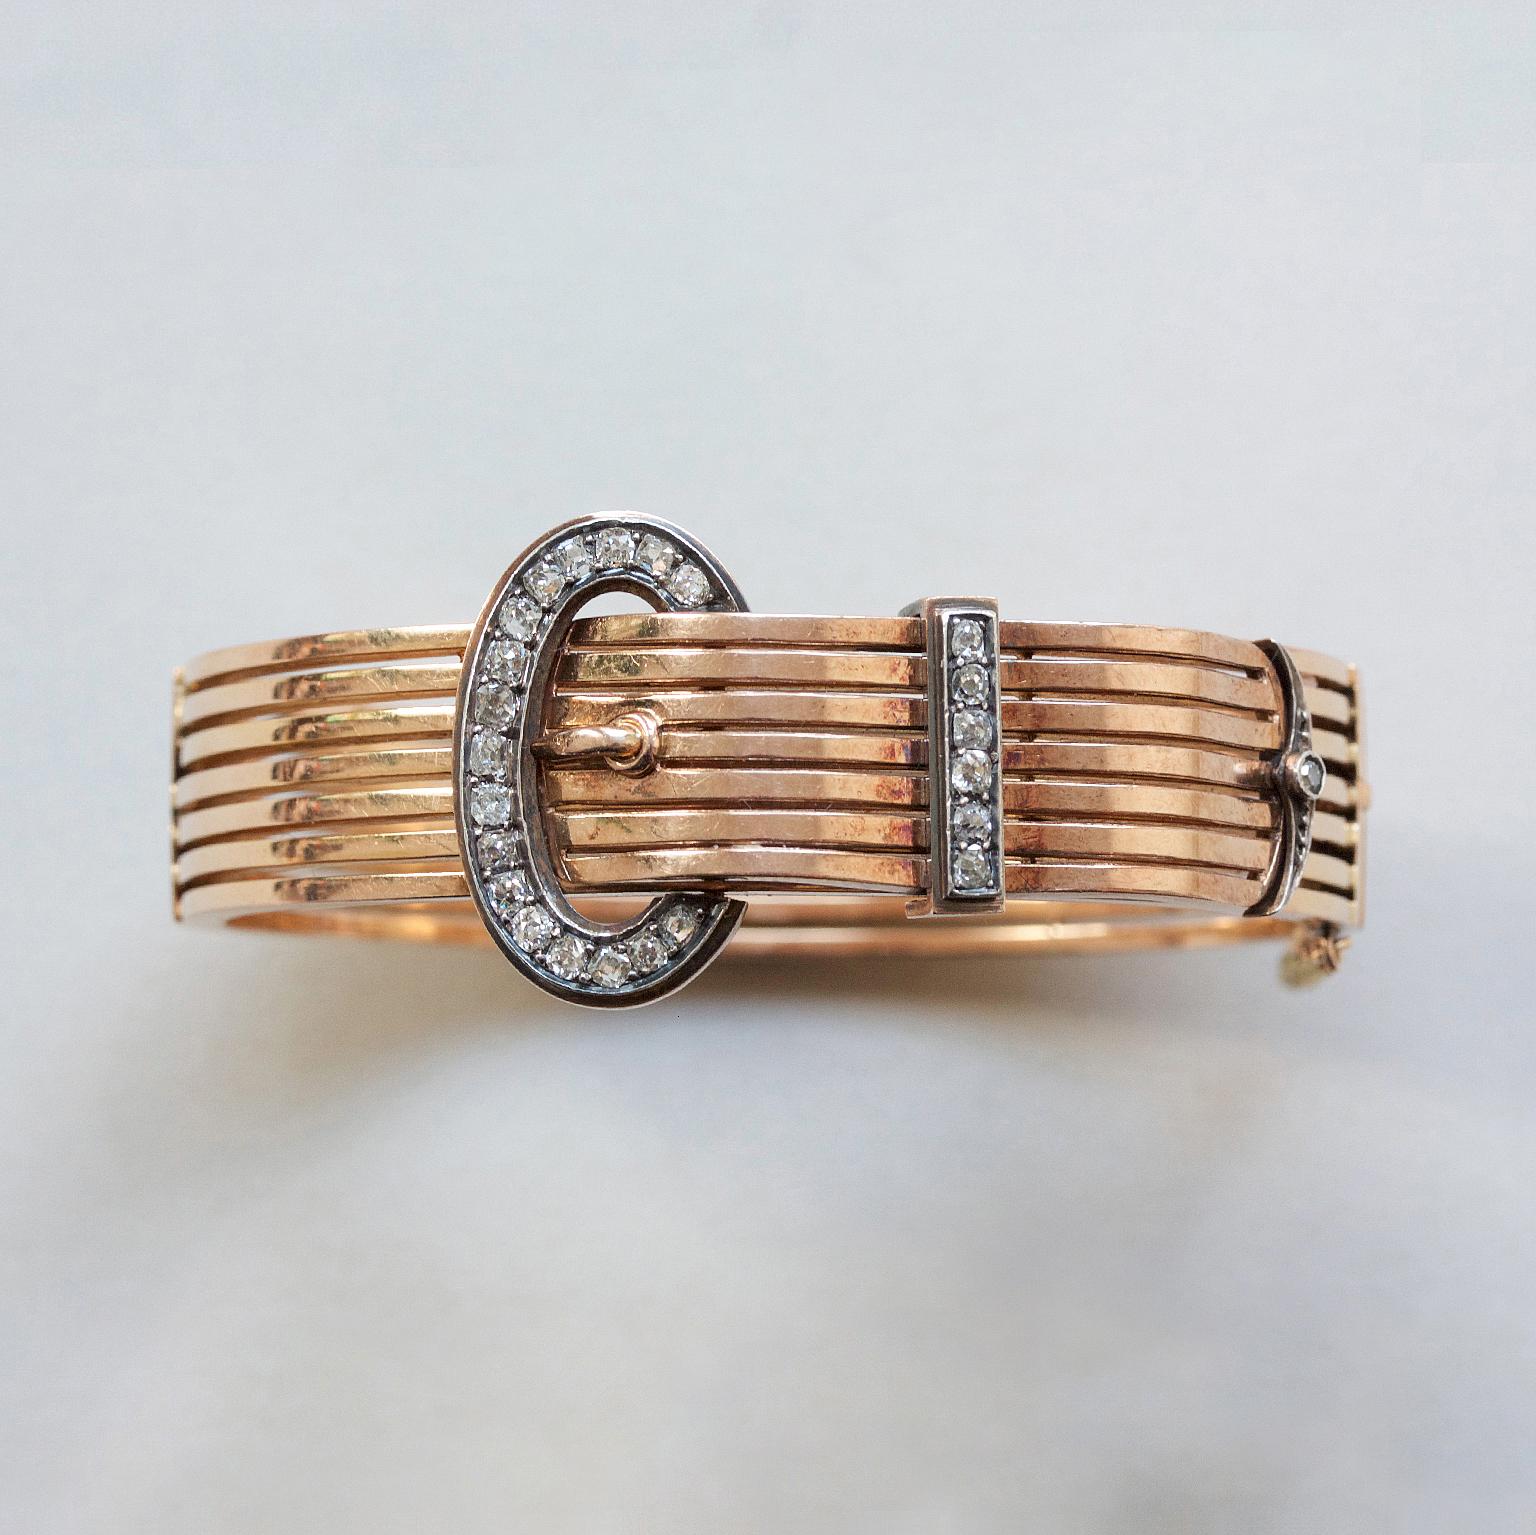 An 18 carat rosé gold bangle with horizontal stripes in the shape of a buckle set with old cut diamonds on the buckle, France, master mark: E crown W, 19th century.

weight: 40.77 gram
width: 2.4 - 1.4 cm
dimensions: 5.9 x 5.6 cm fits a normal size